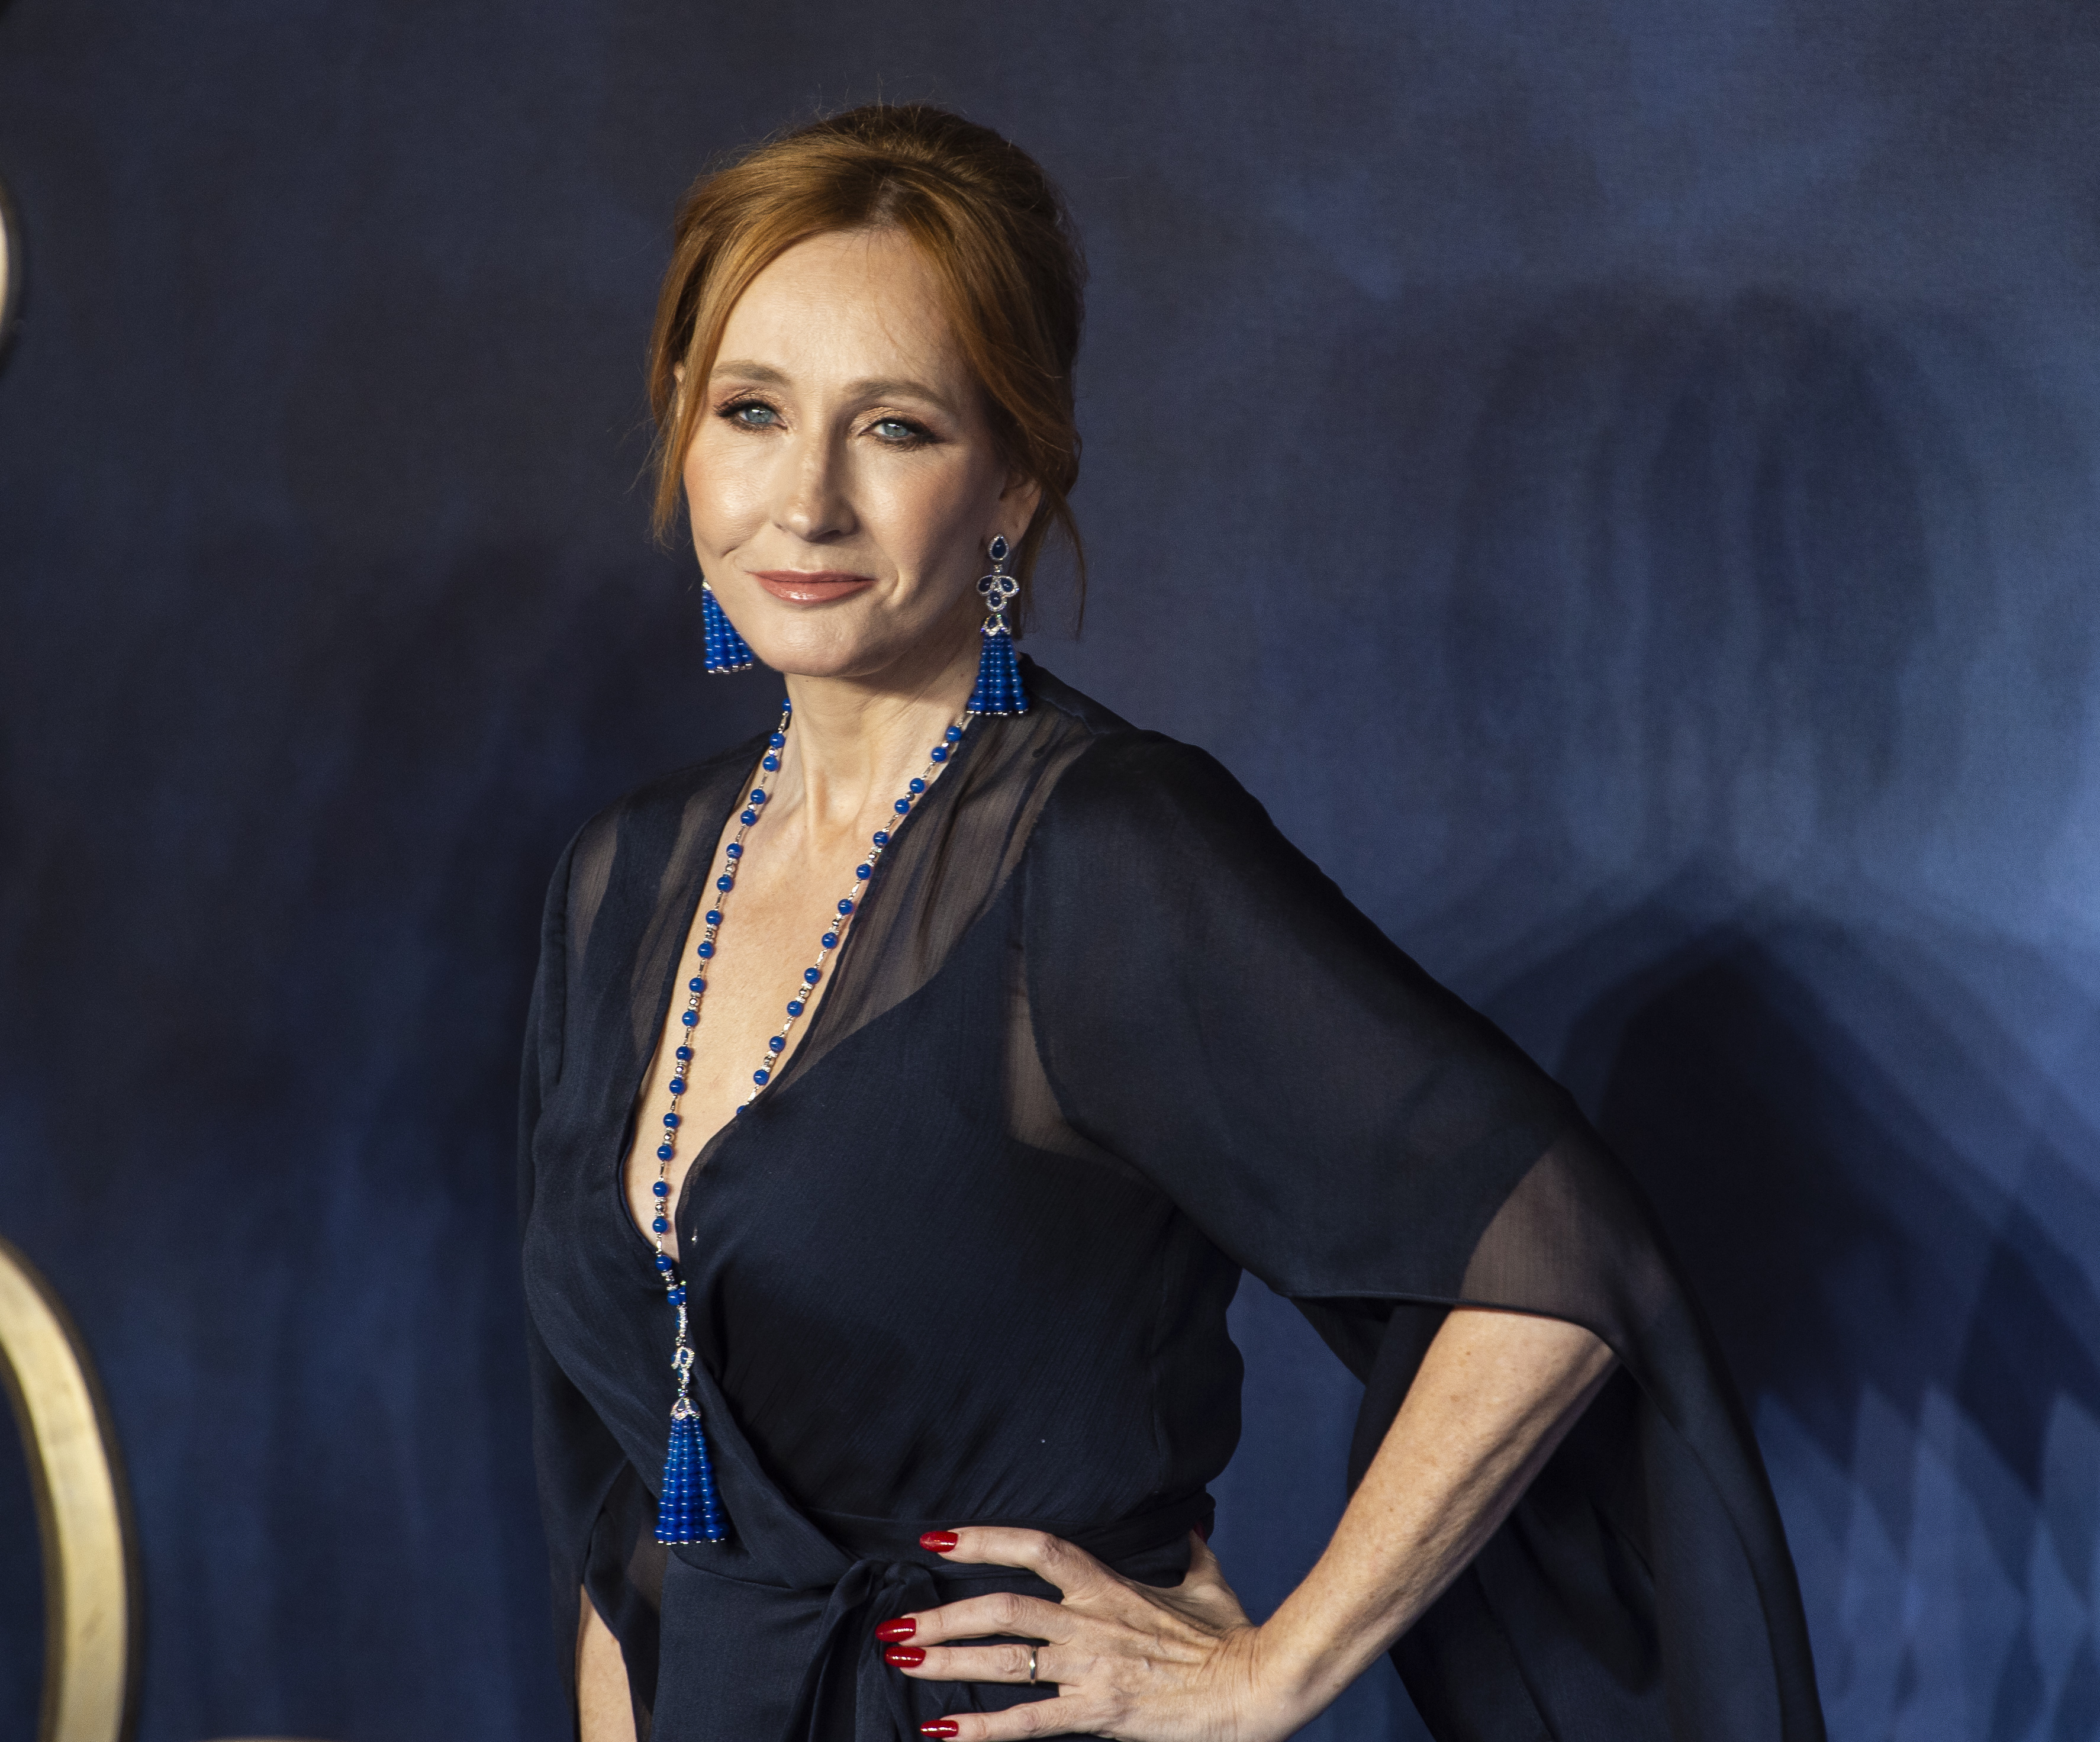 J.K. Rowling attends a screening of 'Fantastic Beasts: The Crimes of Grindelwald' in London on Nov. 13, 2018. (Gary Mitchell—LightRocket/Getty Images)